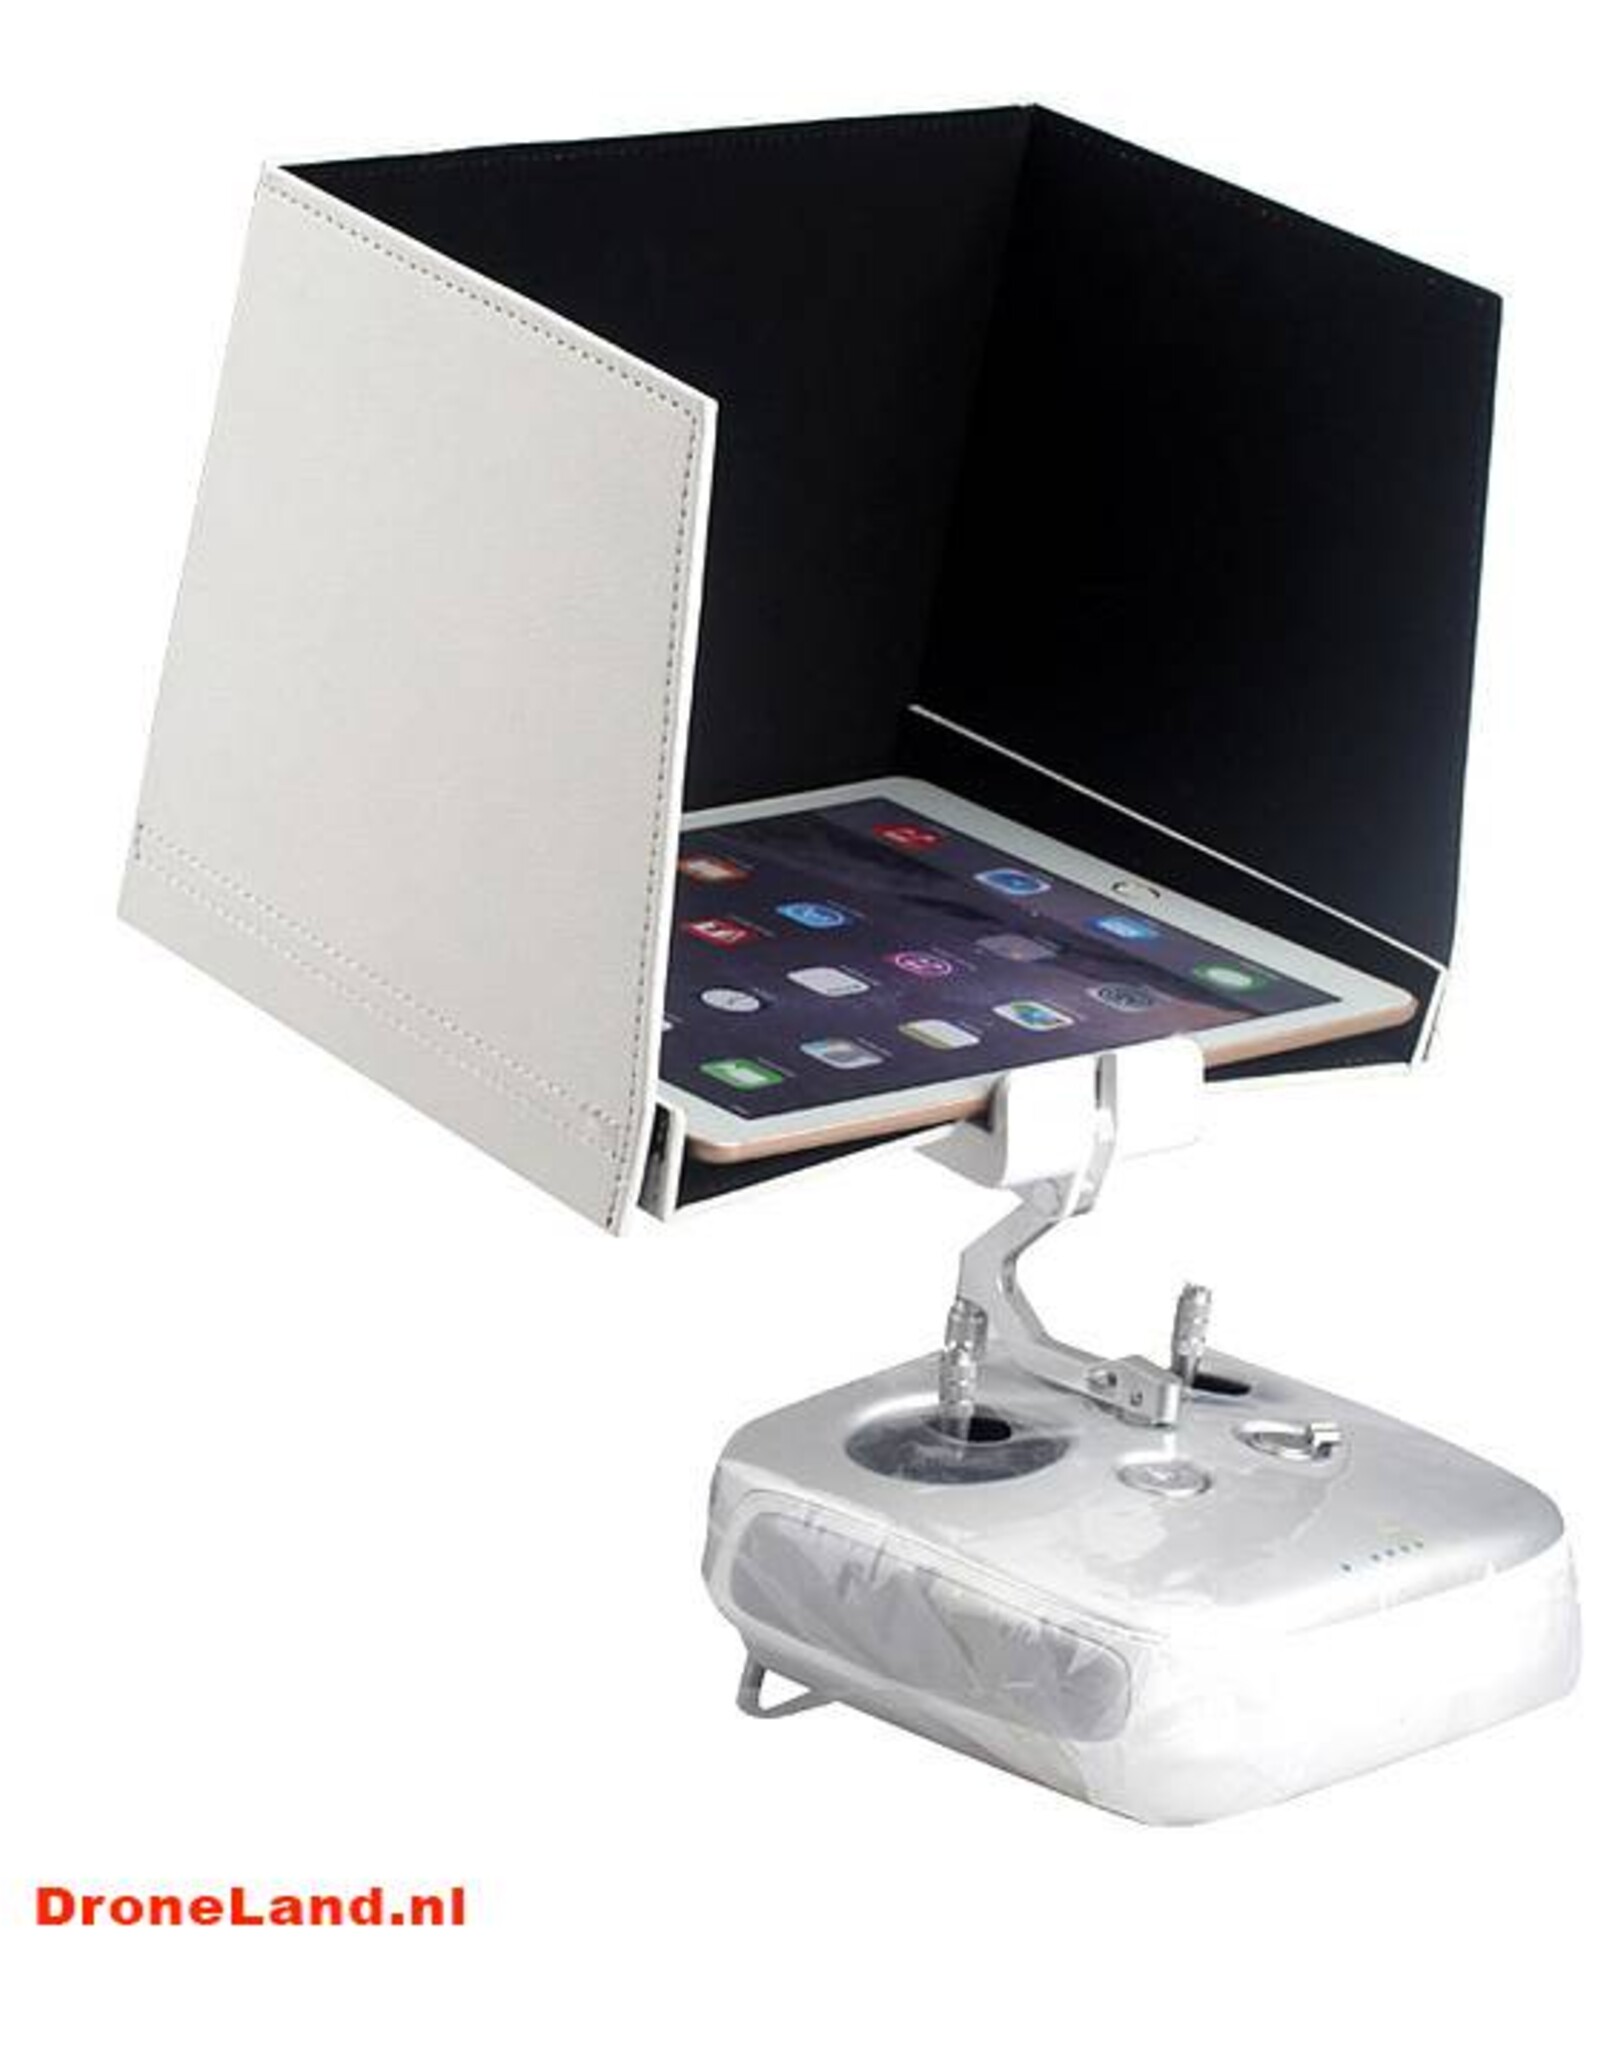 DJI DJI Remote Controller Monitor Hood For Tablets (Part 57)